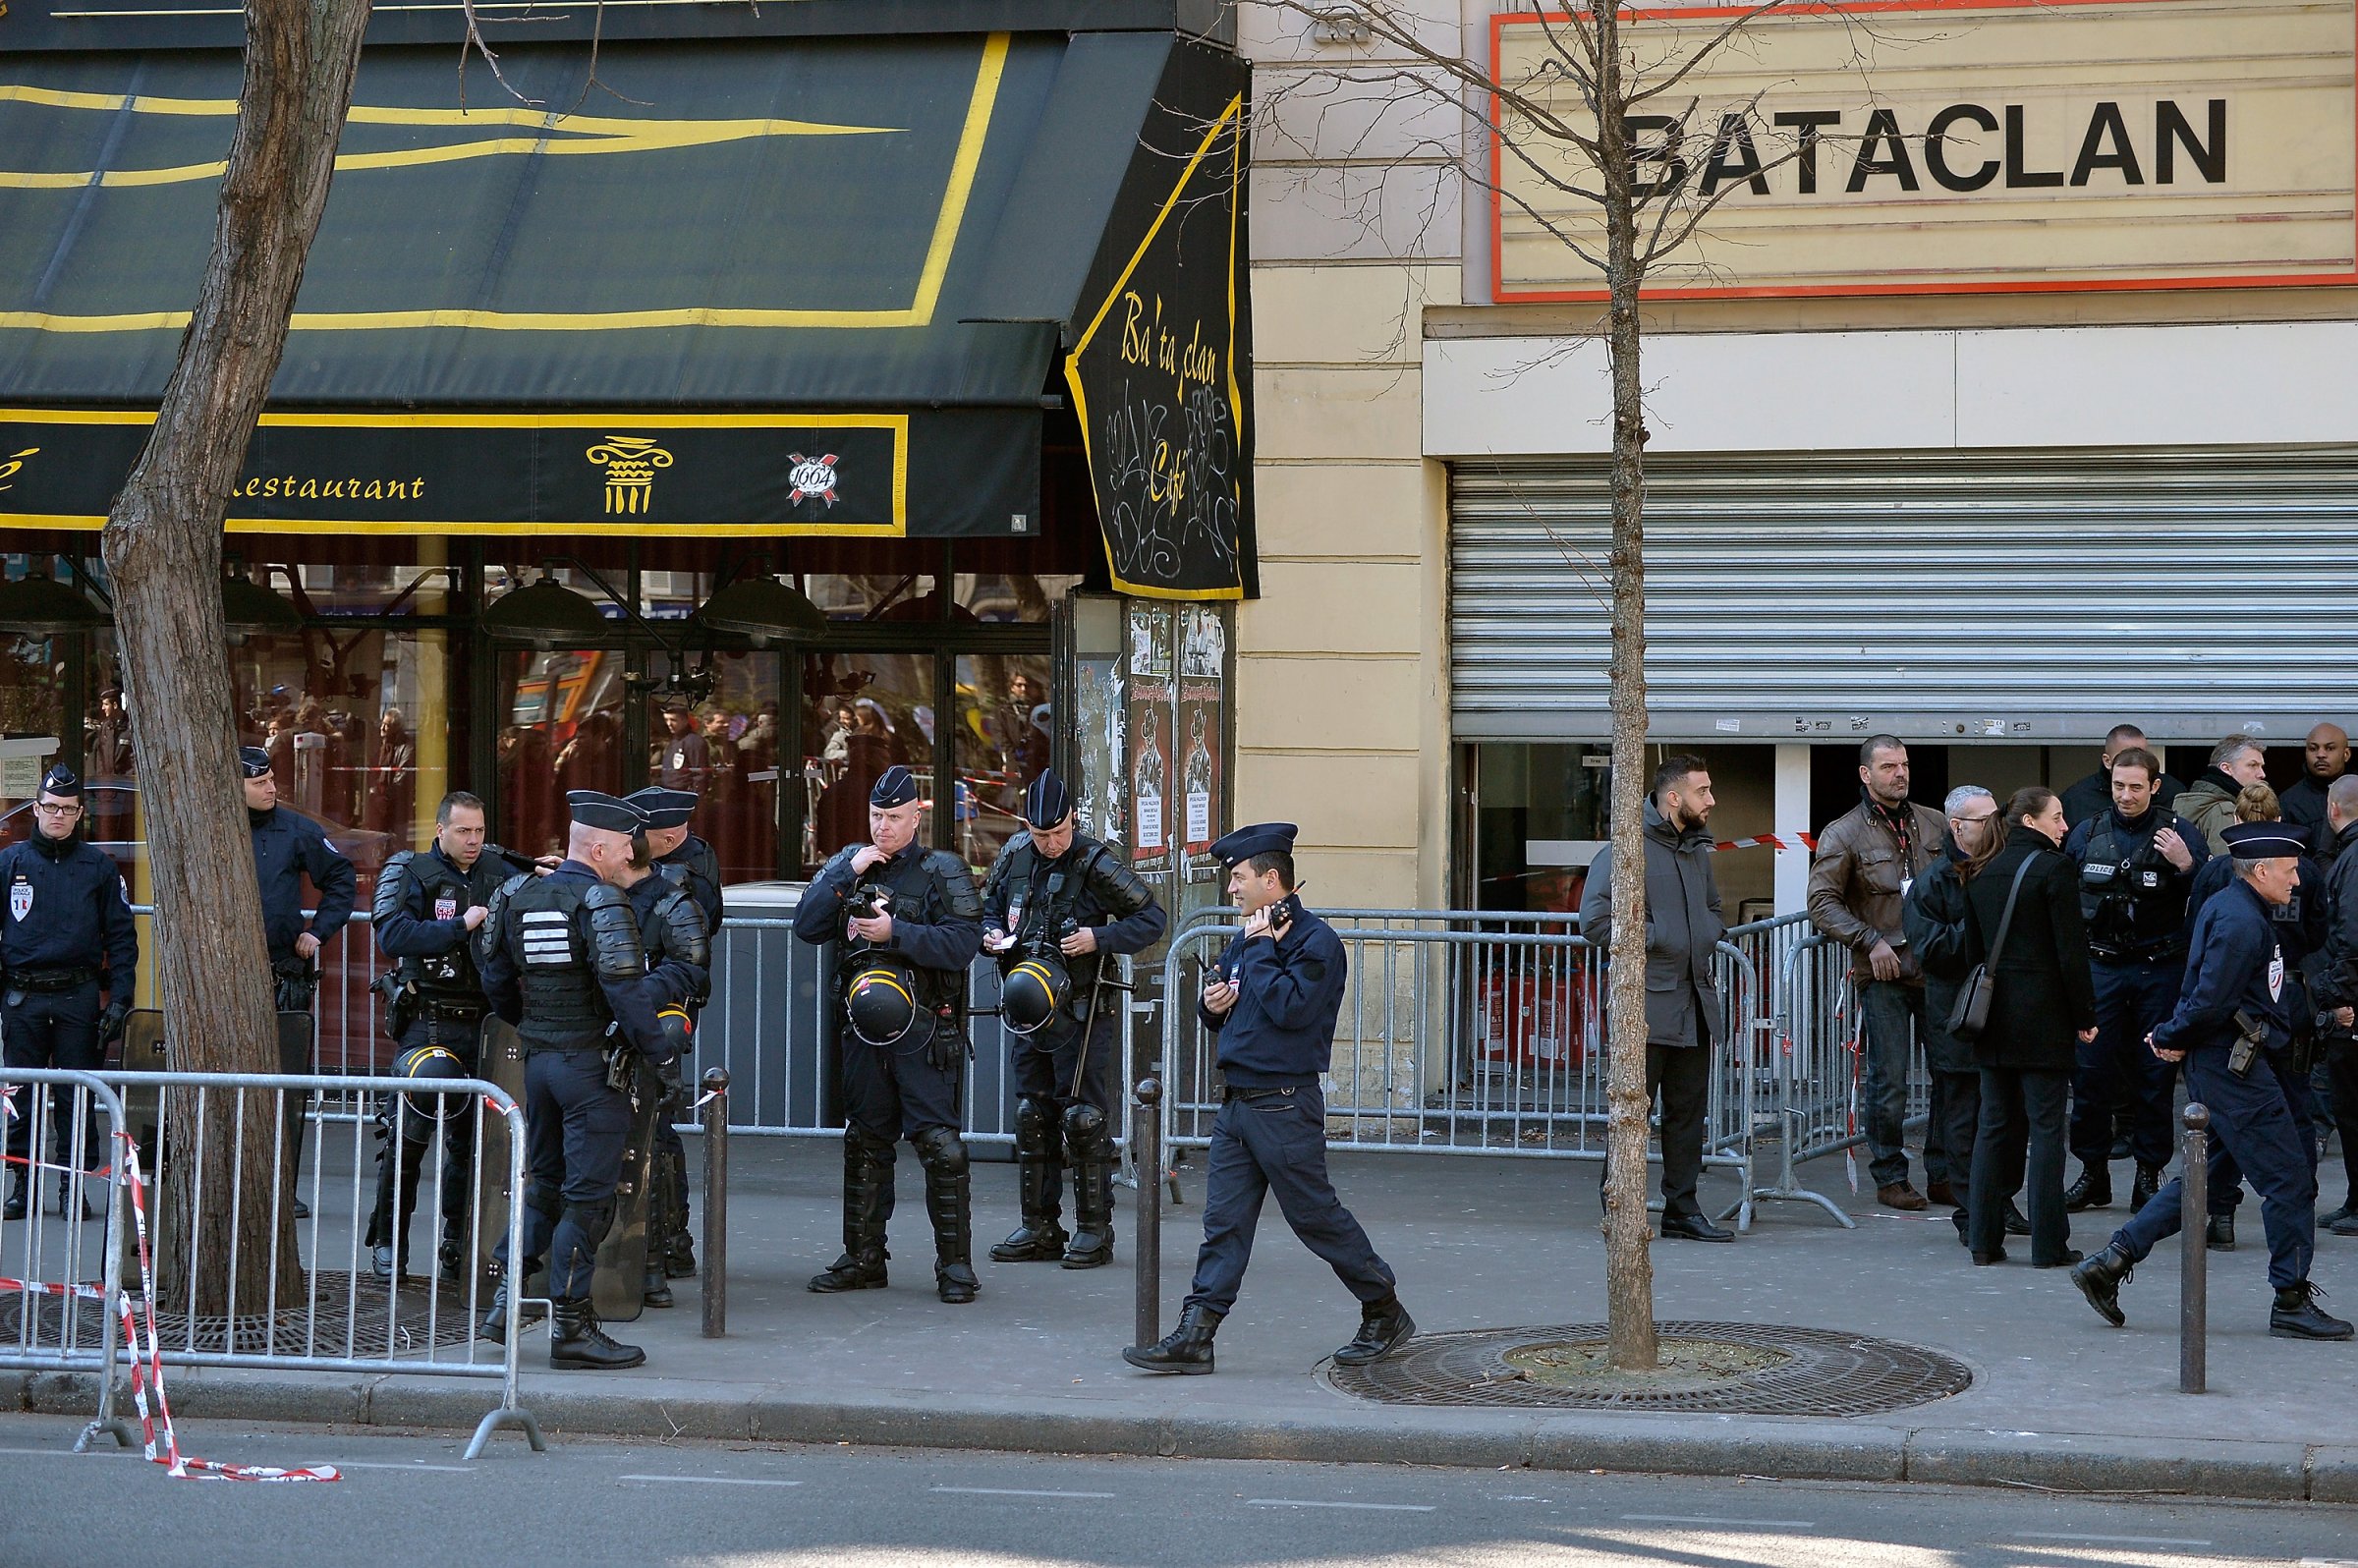 Le Bataclan on March 17, 2016 in Paris, France.